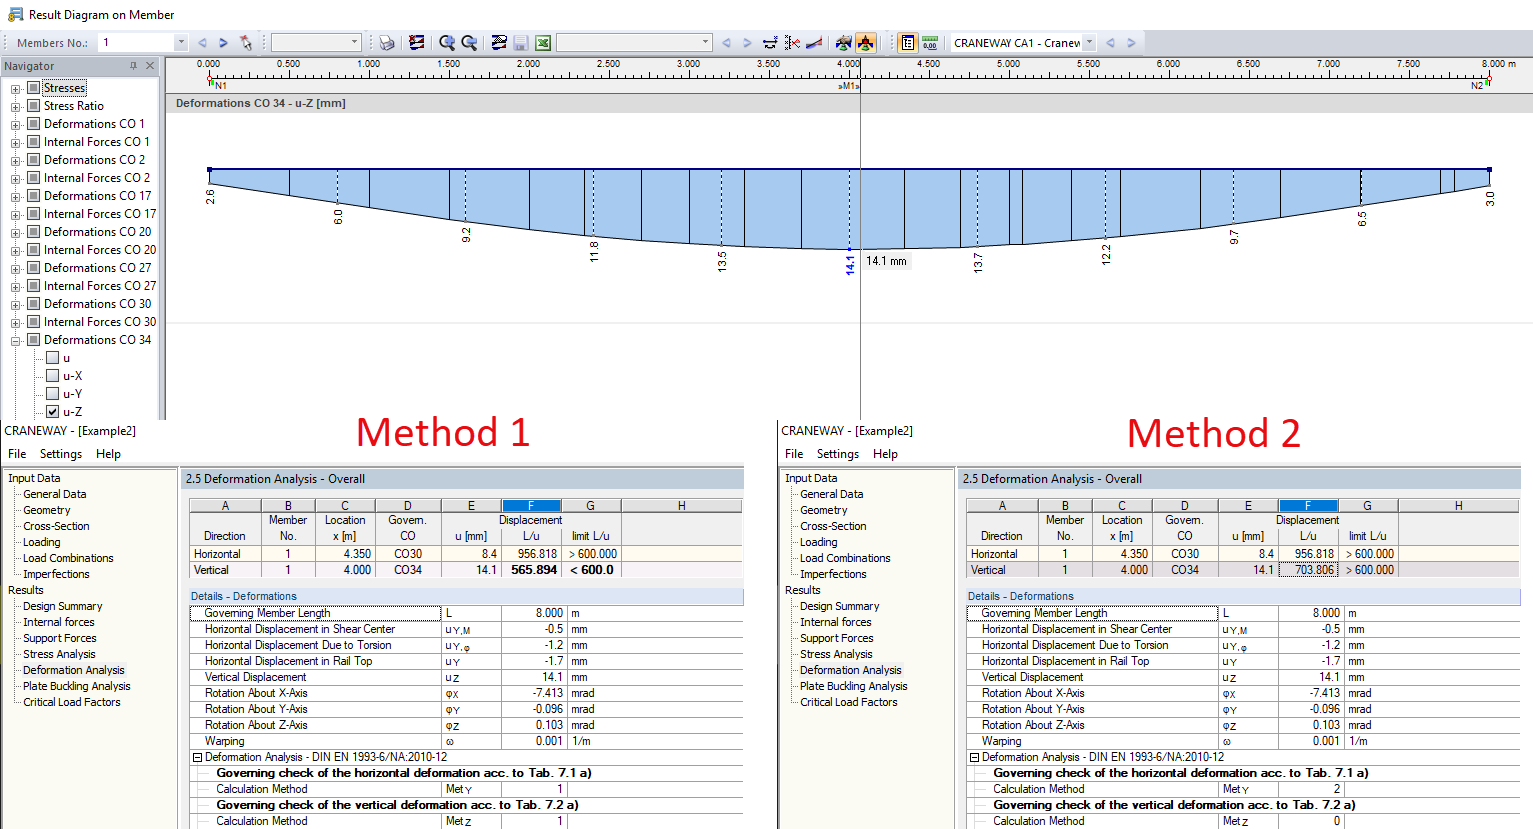 Comparing Results According to Method 1 and Method 2